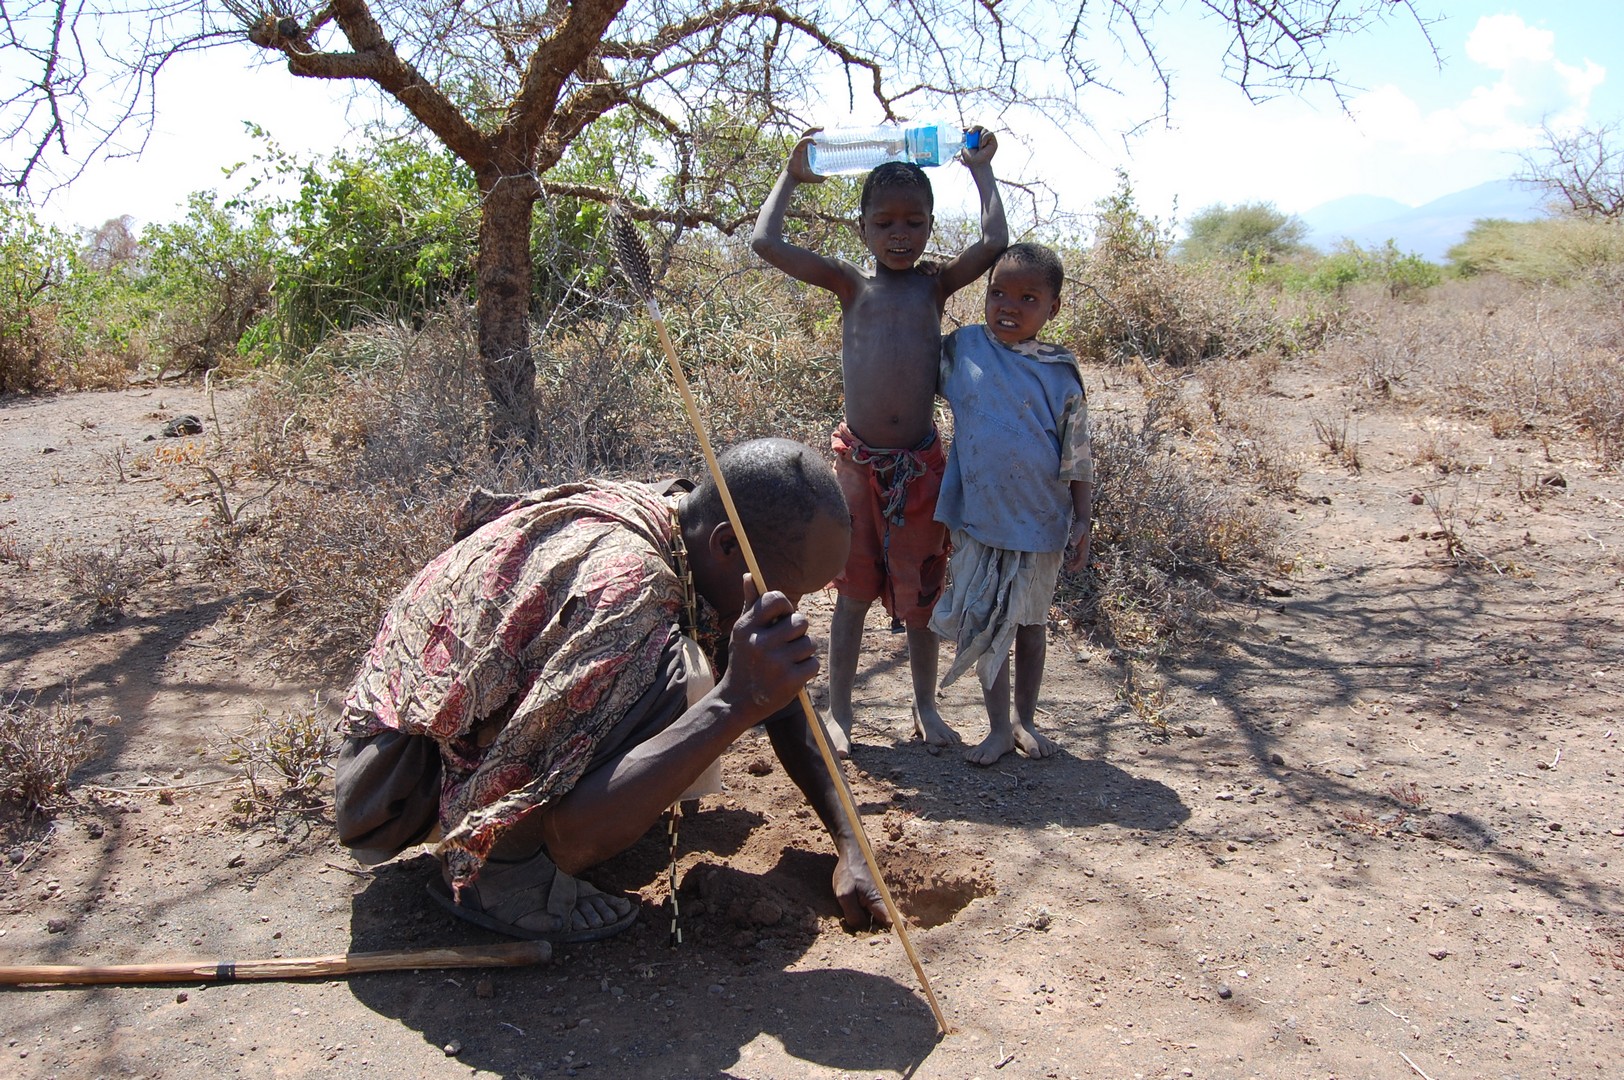 People of Hadzabe bush tribe looking for roots